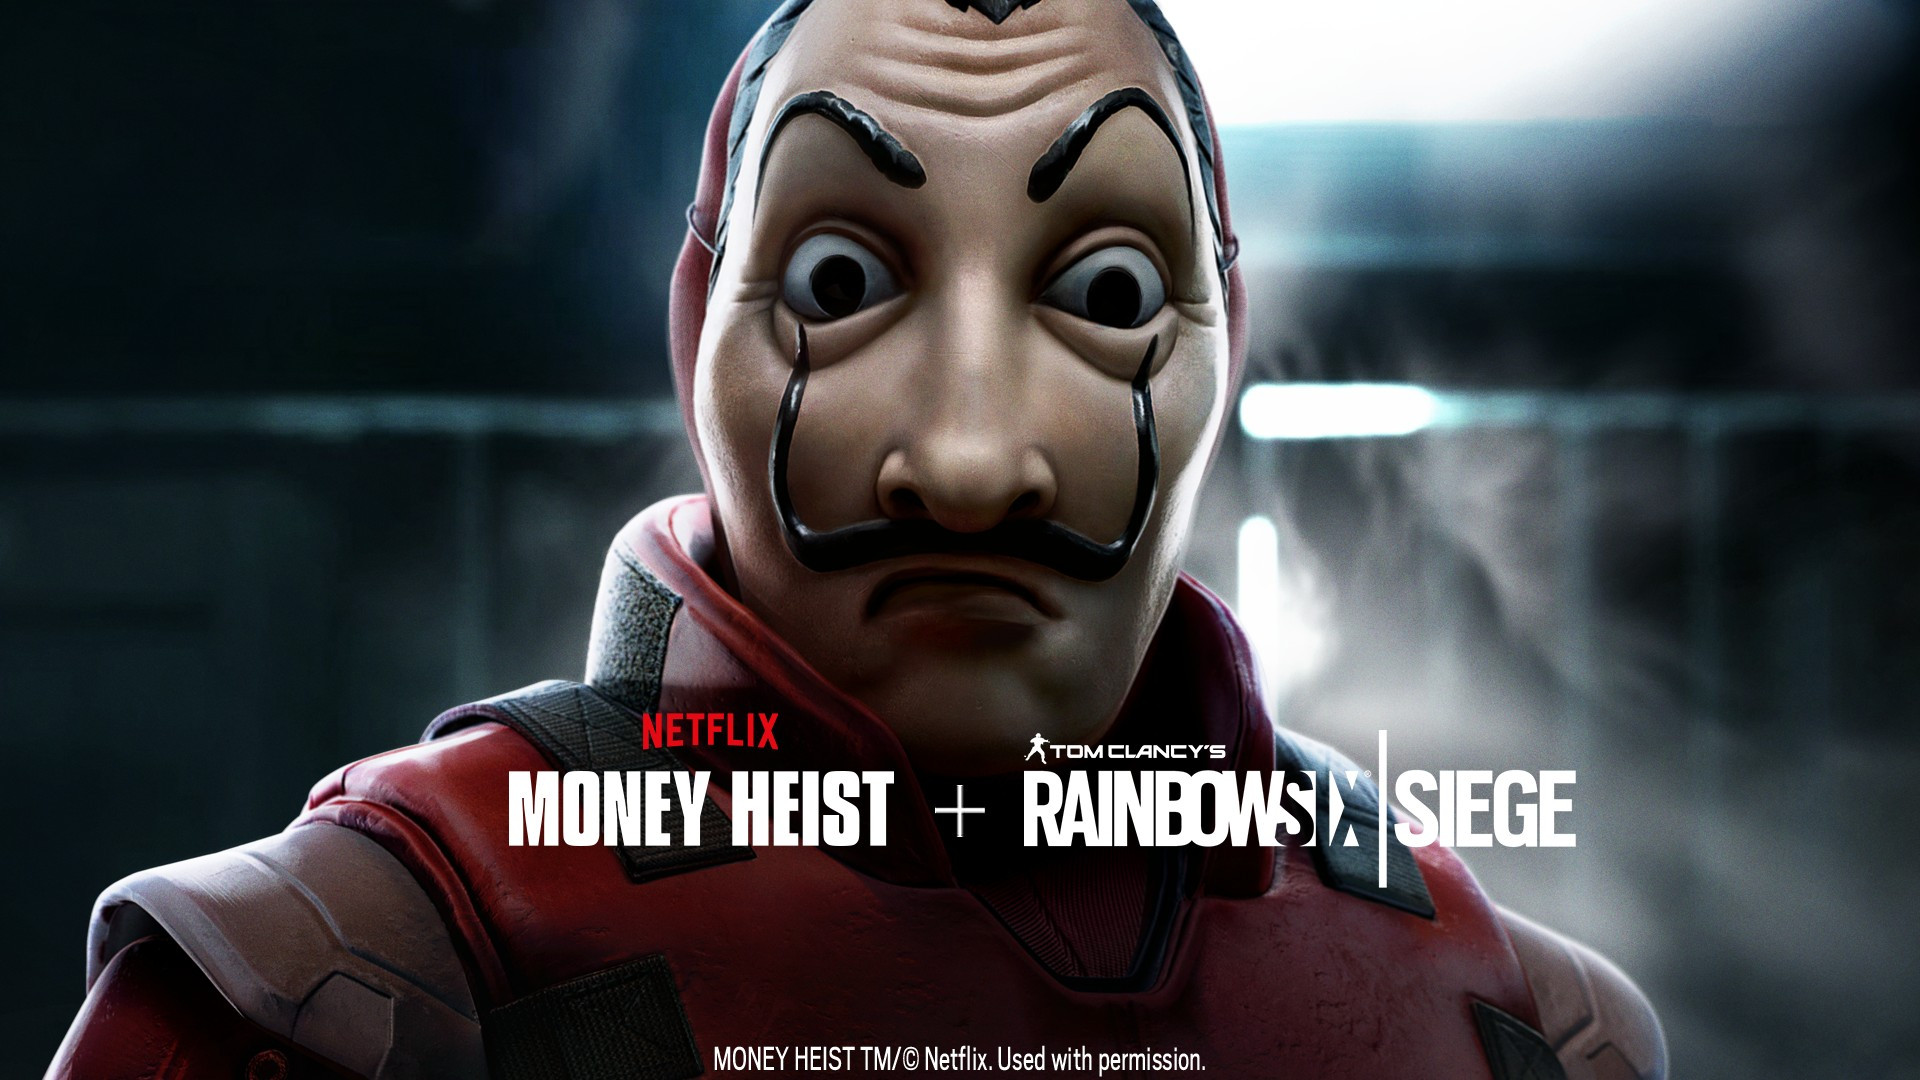 Rainbow Six Siege and “Money Heist” Team Up in Free Weekend Event